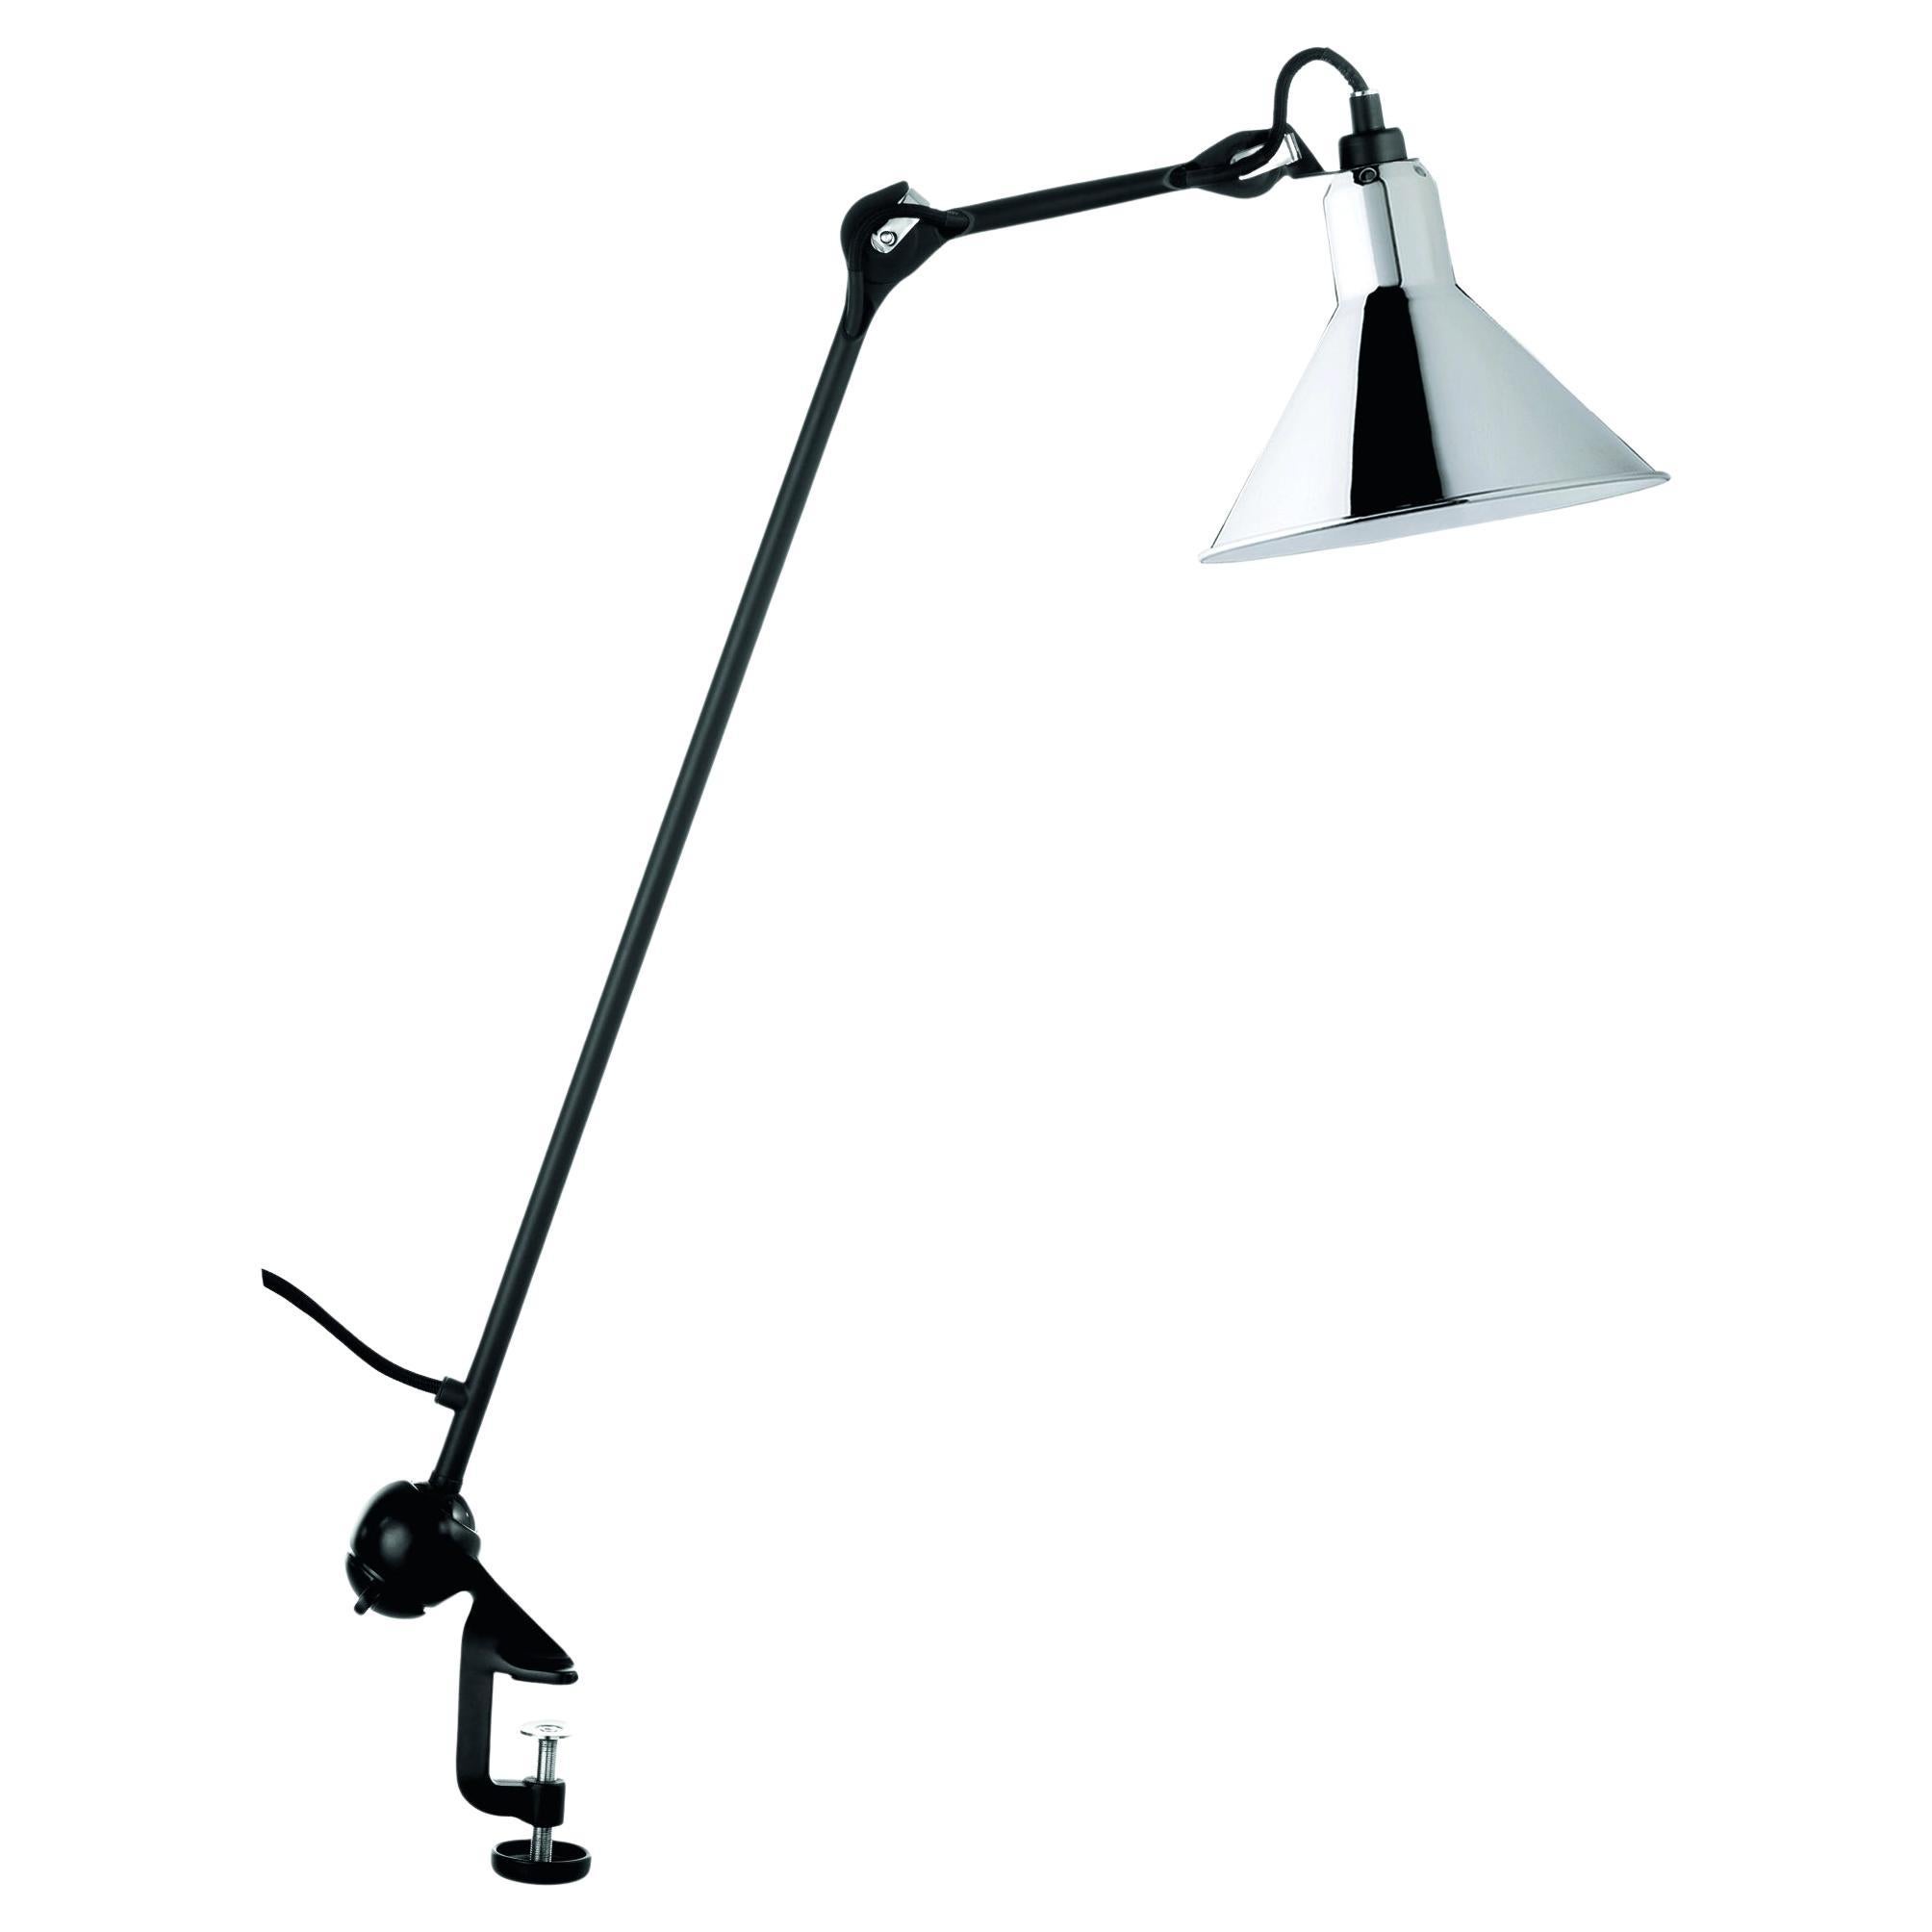 DCW Editions La Lampe Gras N°201 Conic Table Lamp in Black Arm and Chrome Shade